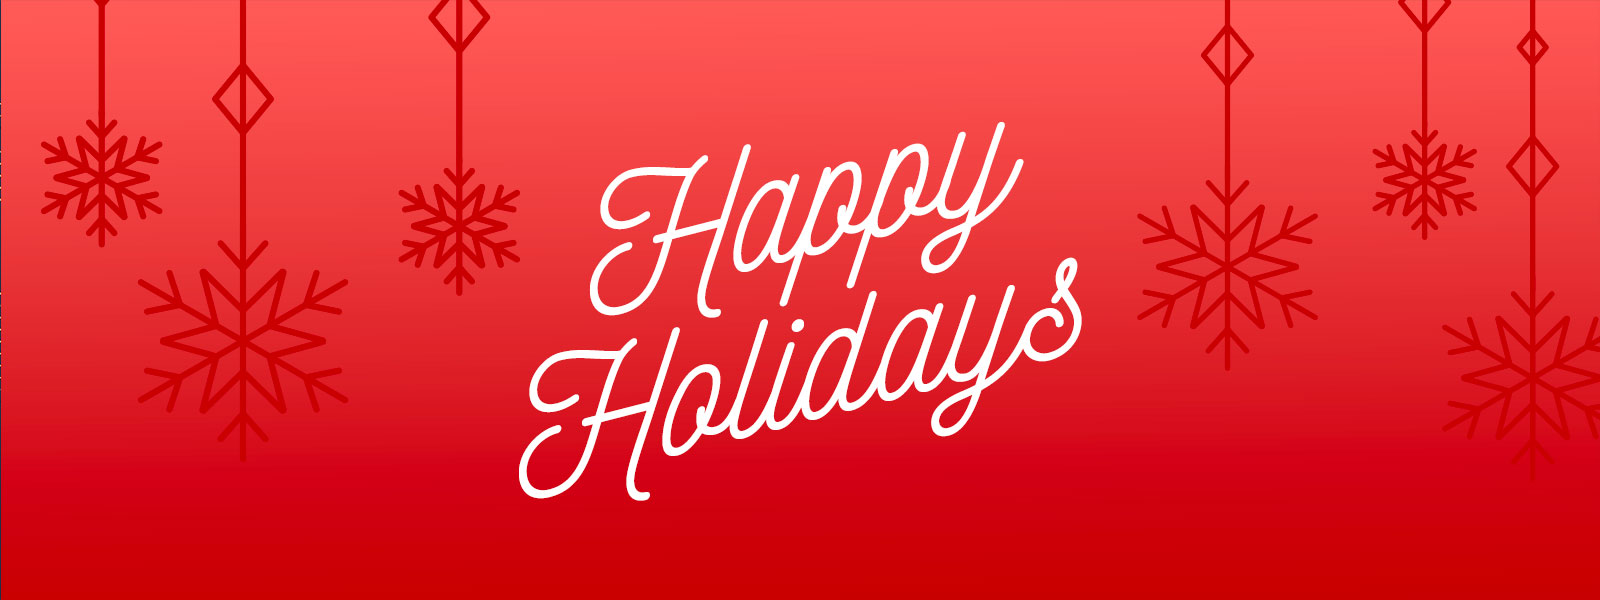 Happy Holidays in white cursive with shadows of snowflakes on a red background